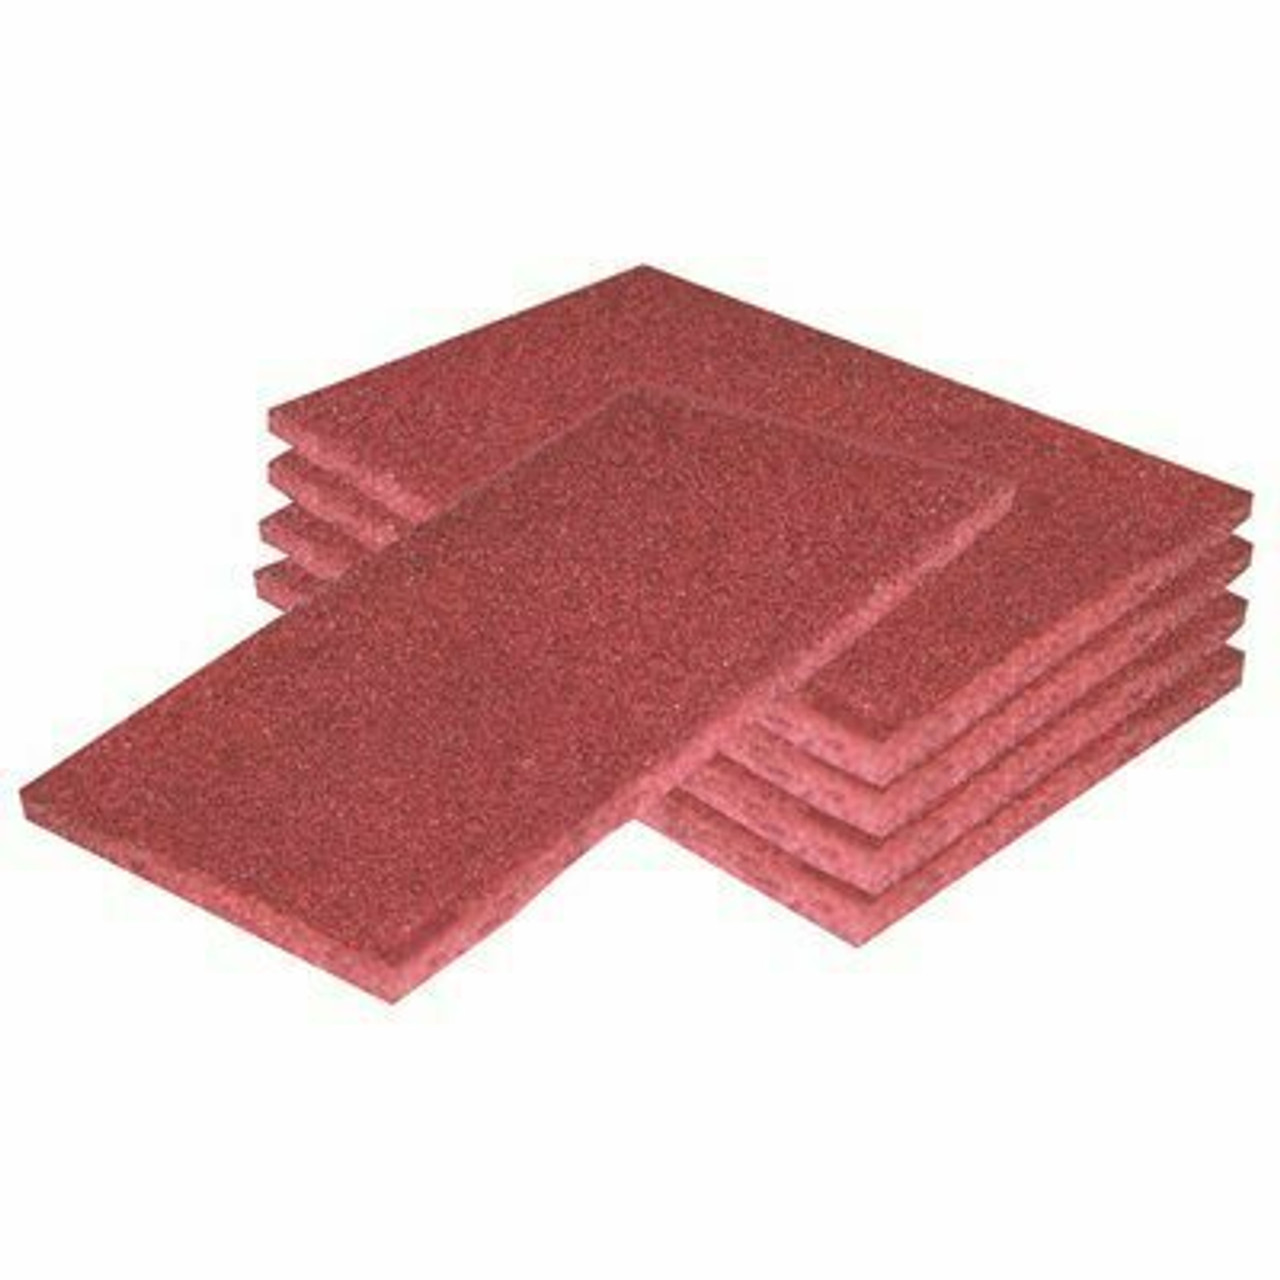 National Brand Alternative 4 In. X 6 In. Multi-Purpose Abrasive Cleaning Pads (5-Pack)